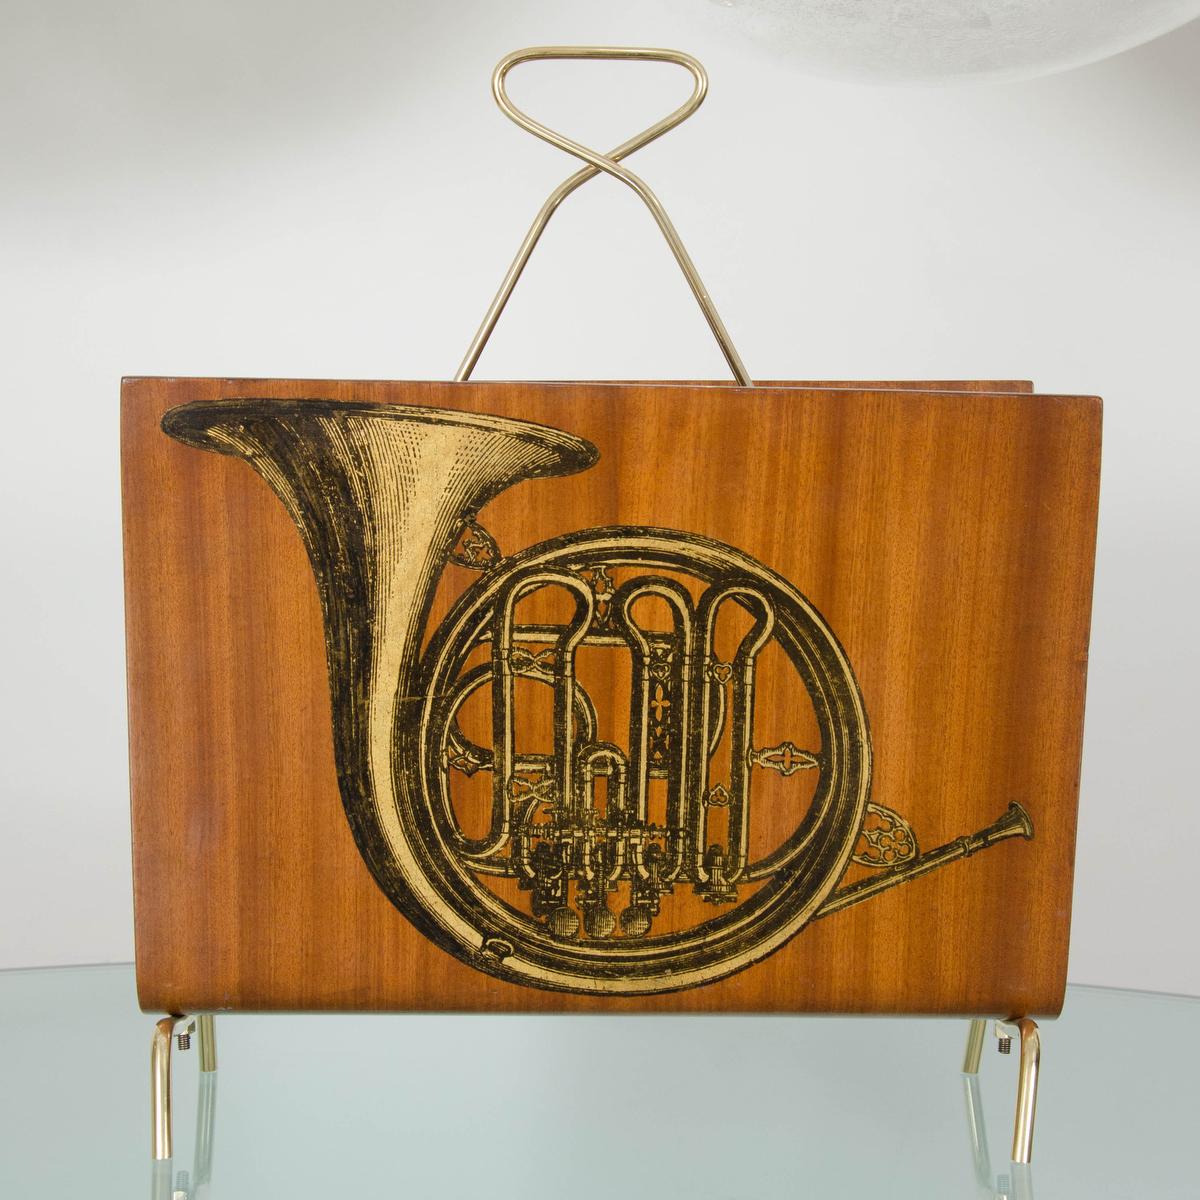 Blonde wood curved magazine rack with musical instrument design and brass details.